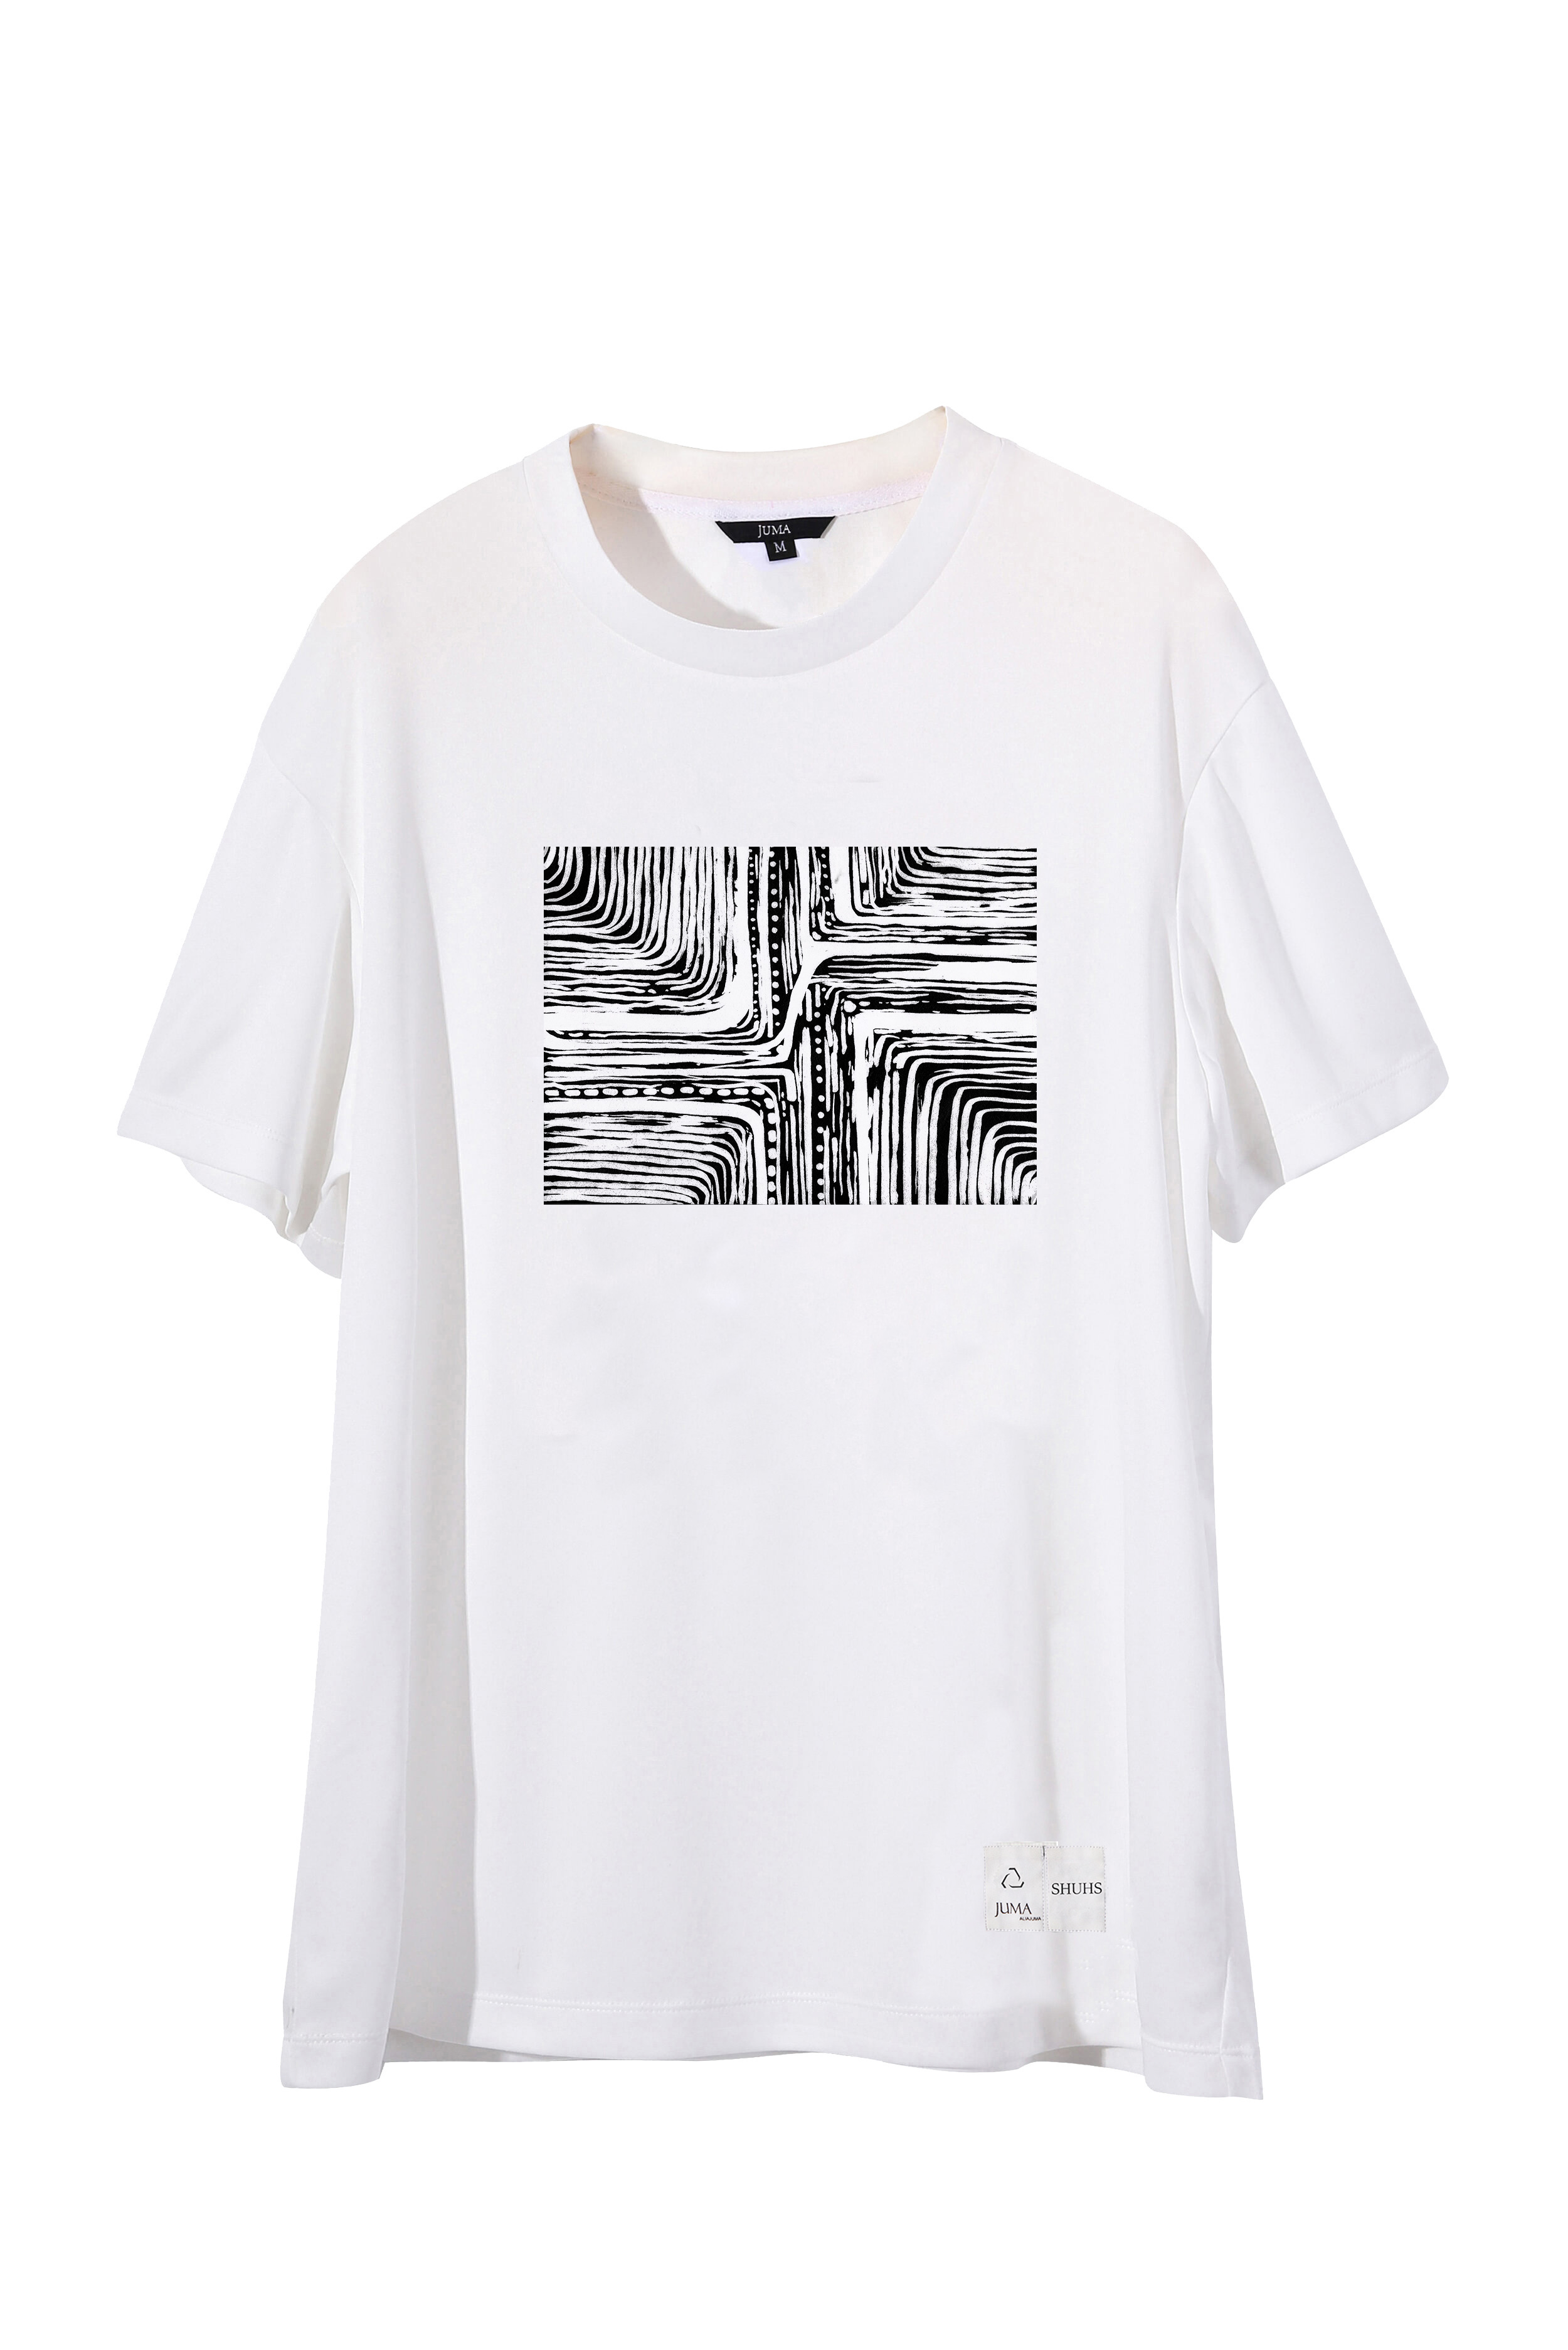 Recharge 印花 2 件 T 恤 - 4 个再生水瓶 - 黑色｜Recharge Print 2 T-Shirt - 4 Recycled Water Bottles-Black